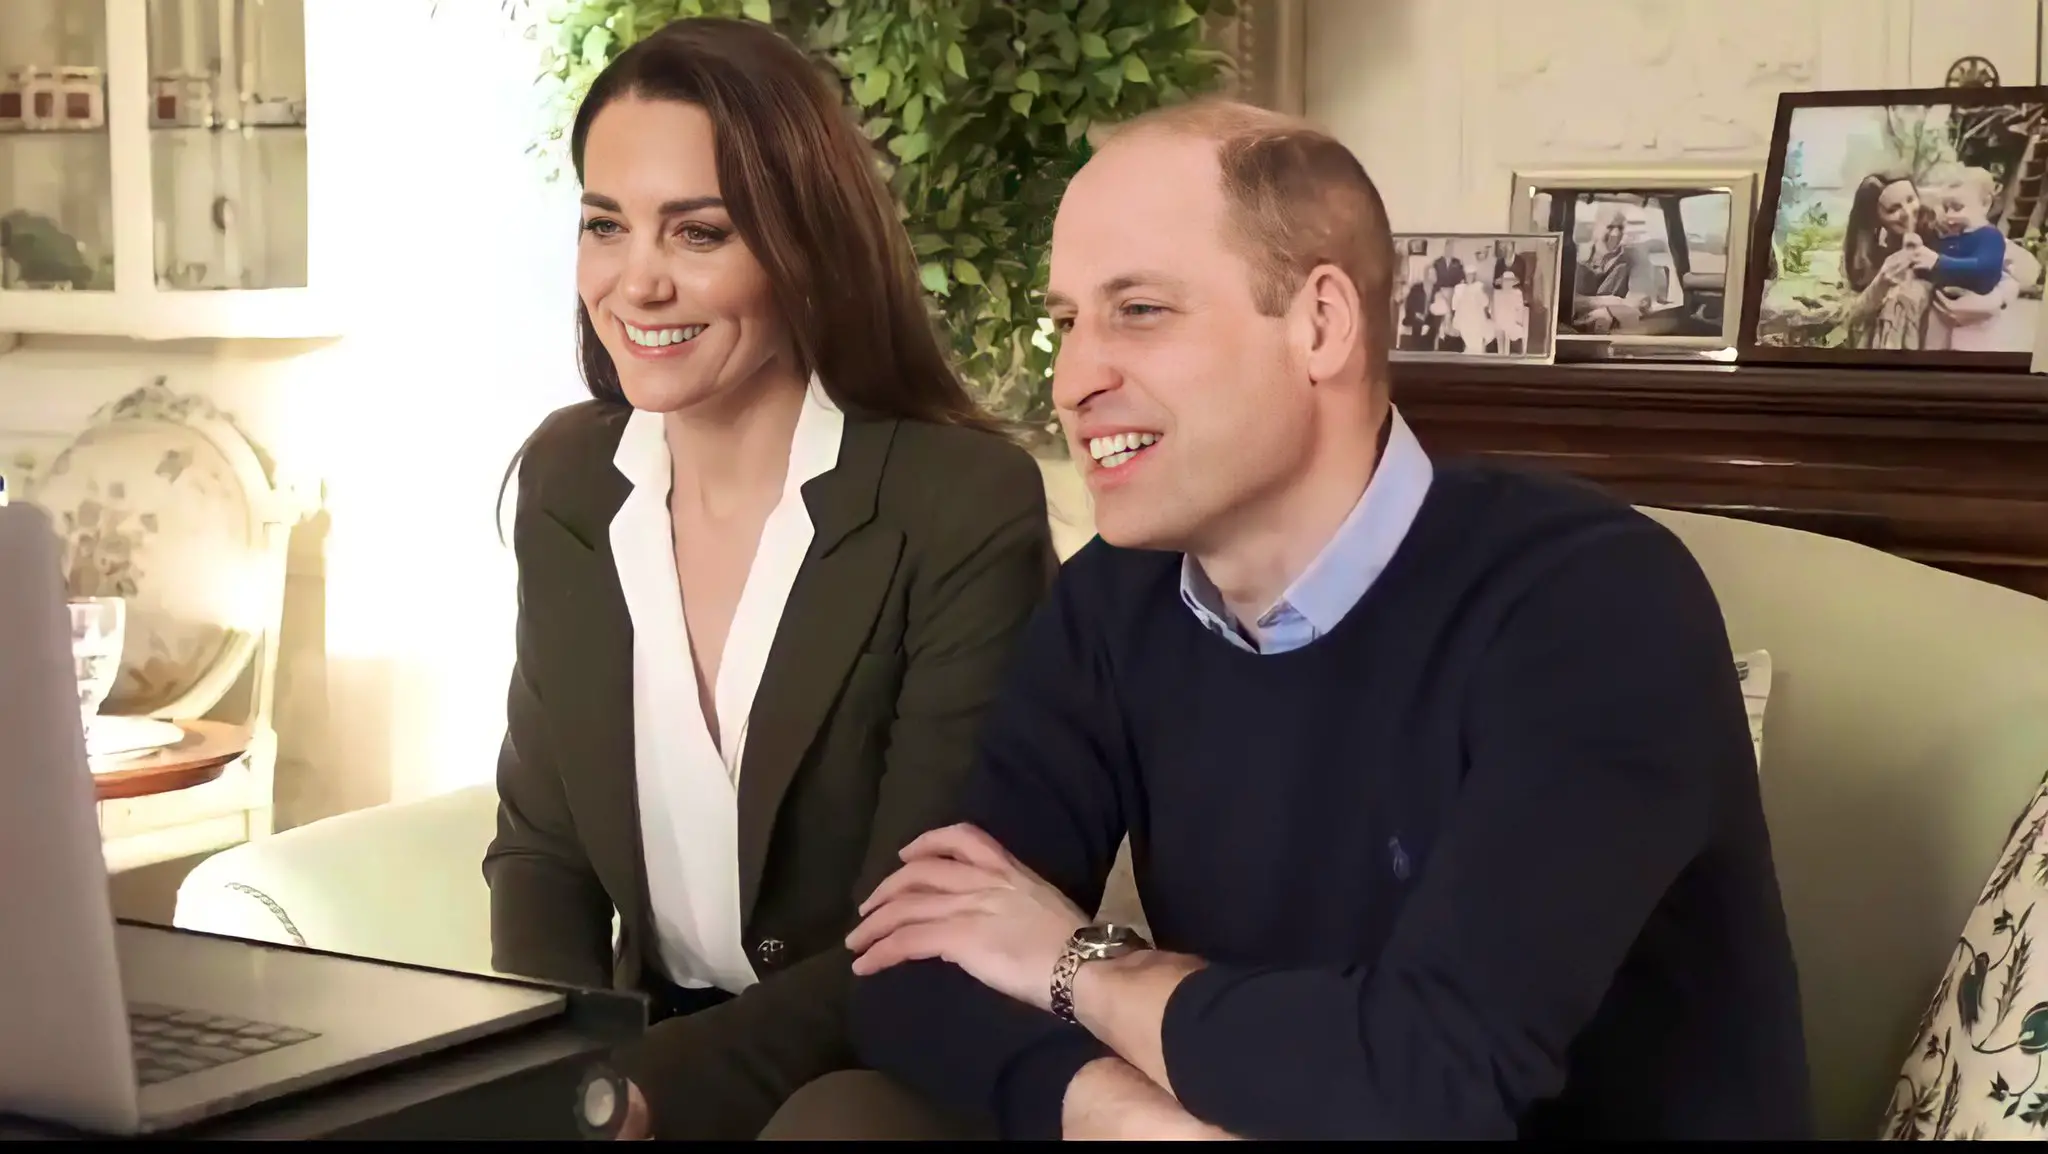 The Duchess of Cambridge wore Green Smythe Blazer for a video call to long-term health issue patiends receiving Covid vaccine